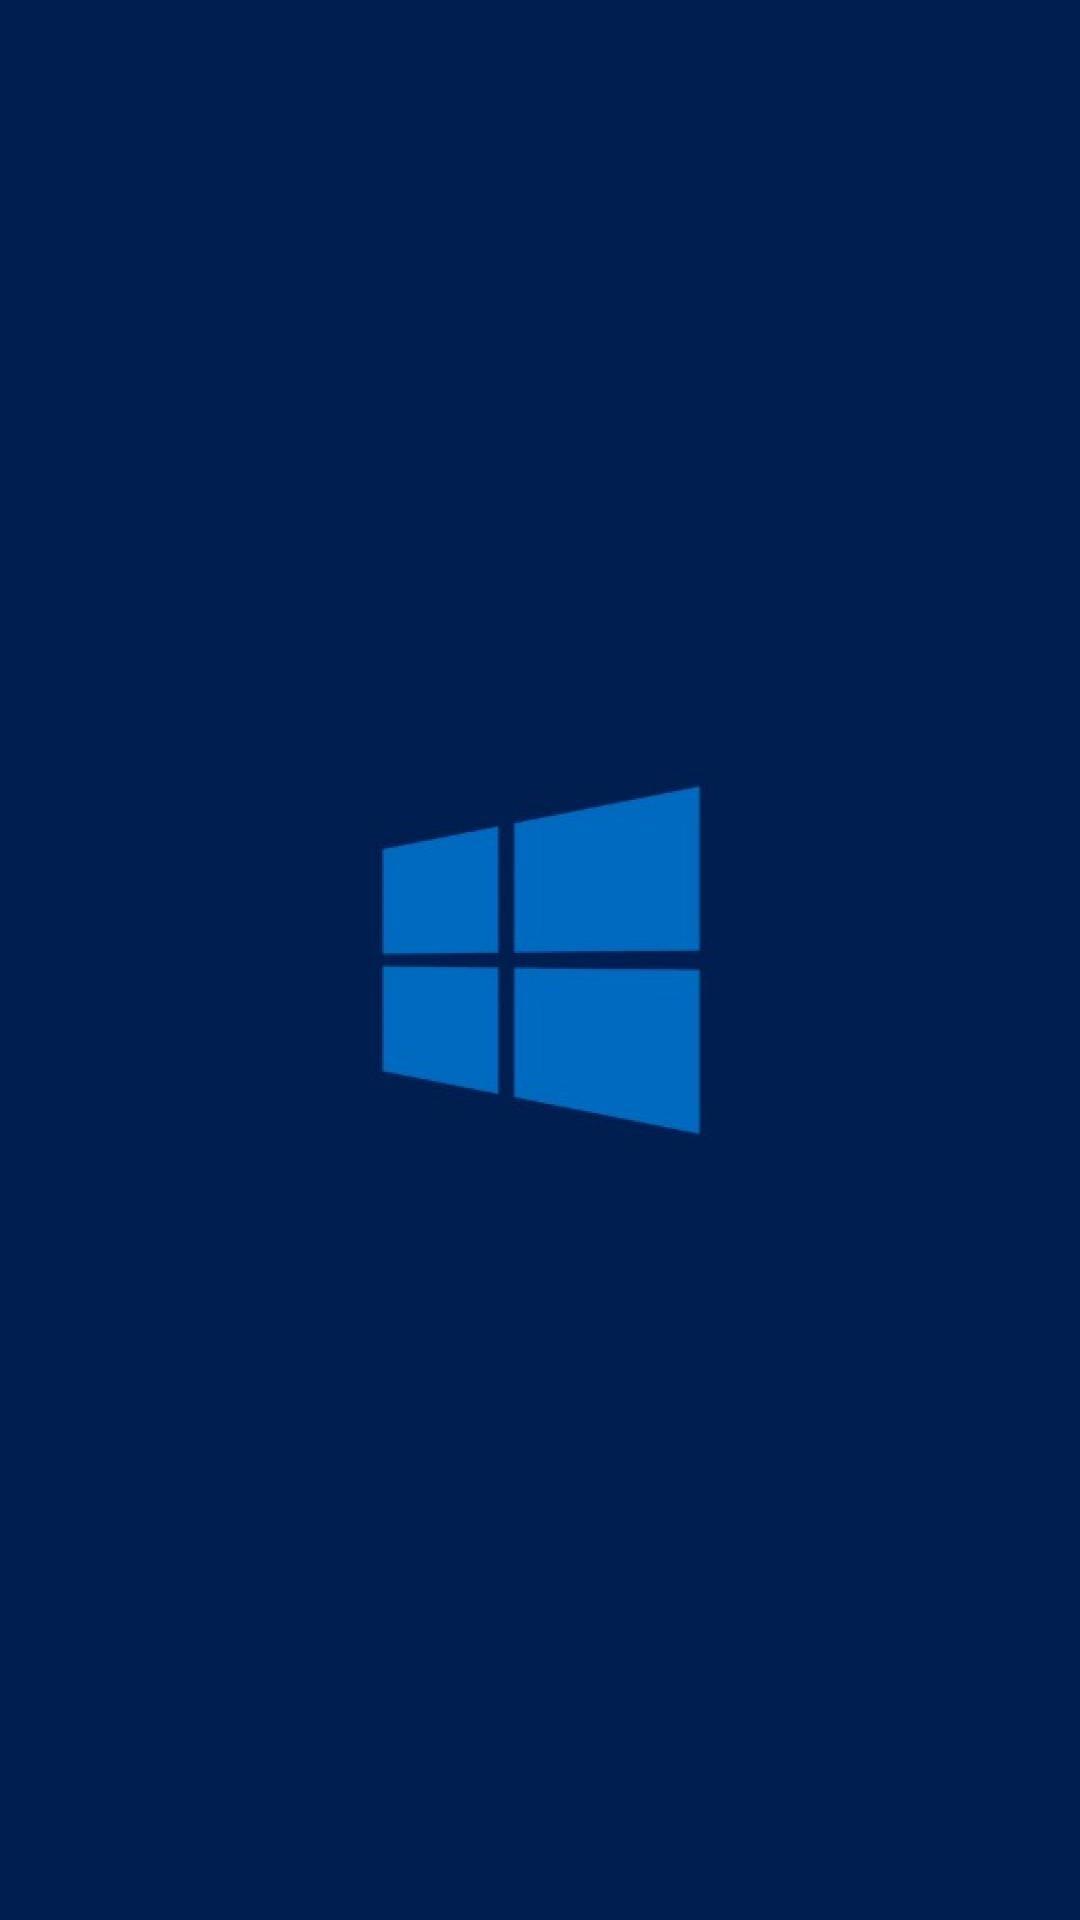 1080x1920  Windows 10 Mobile Wallpapers - Wallpaper Cave